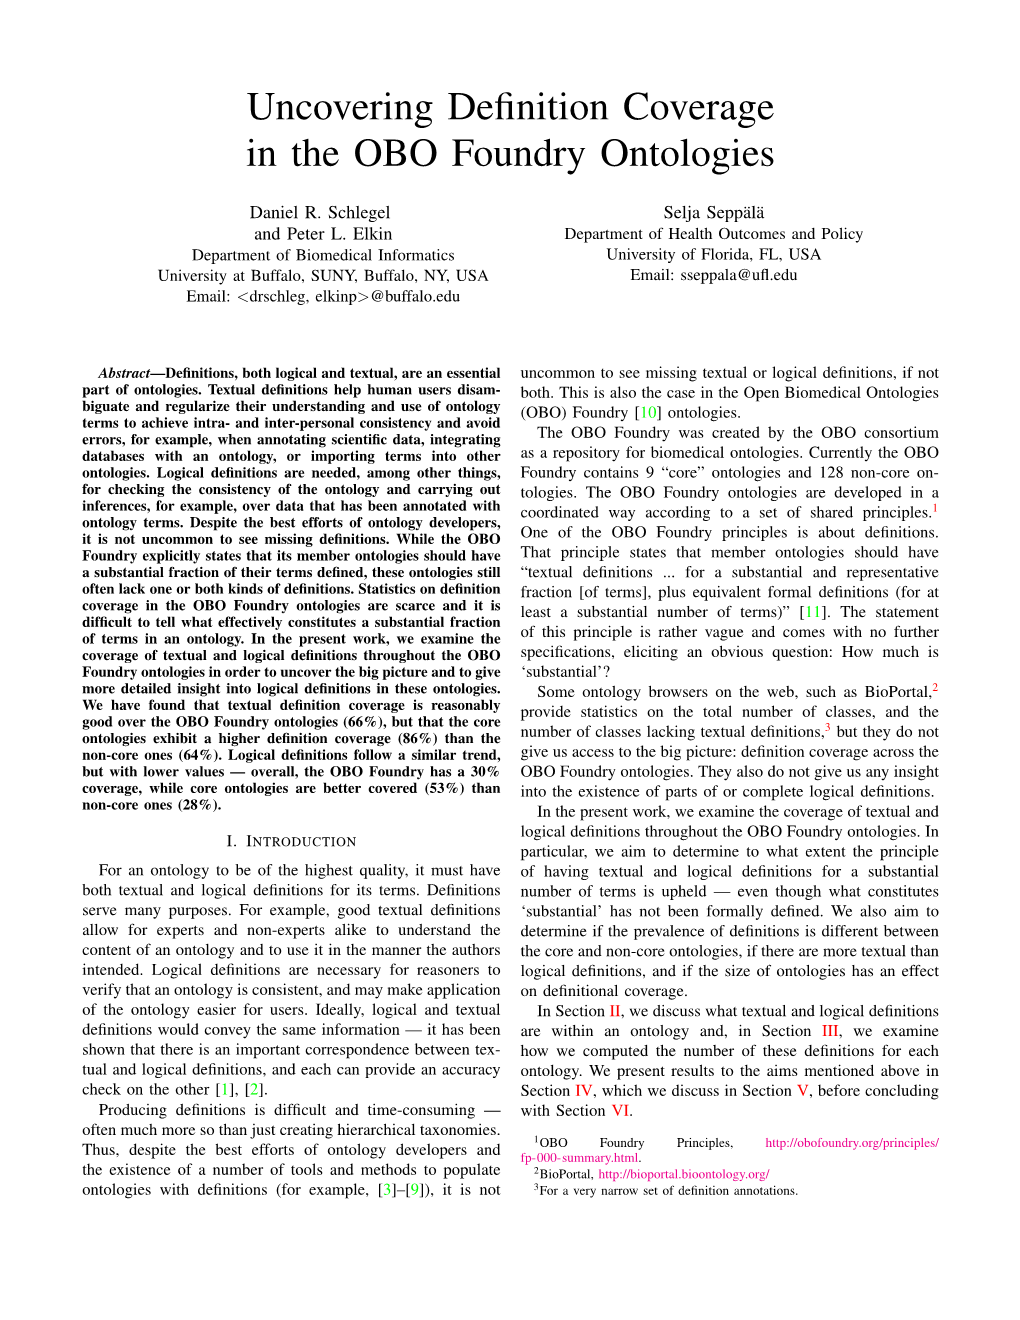 Uncovering Definition Coverage in the OBO Foundry Ontologies